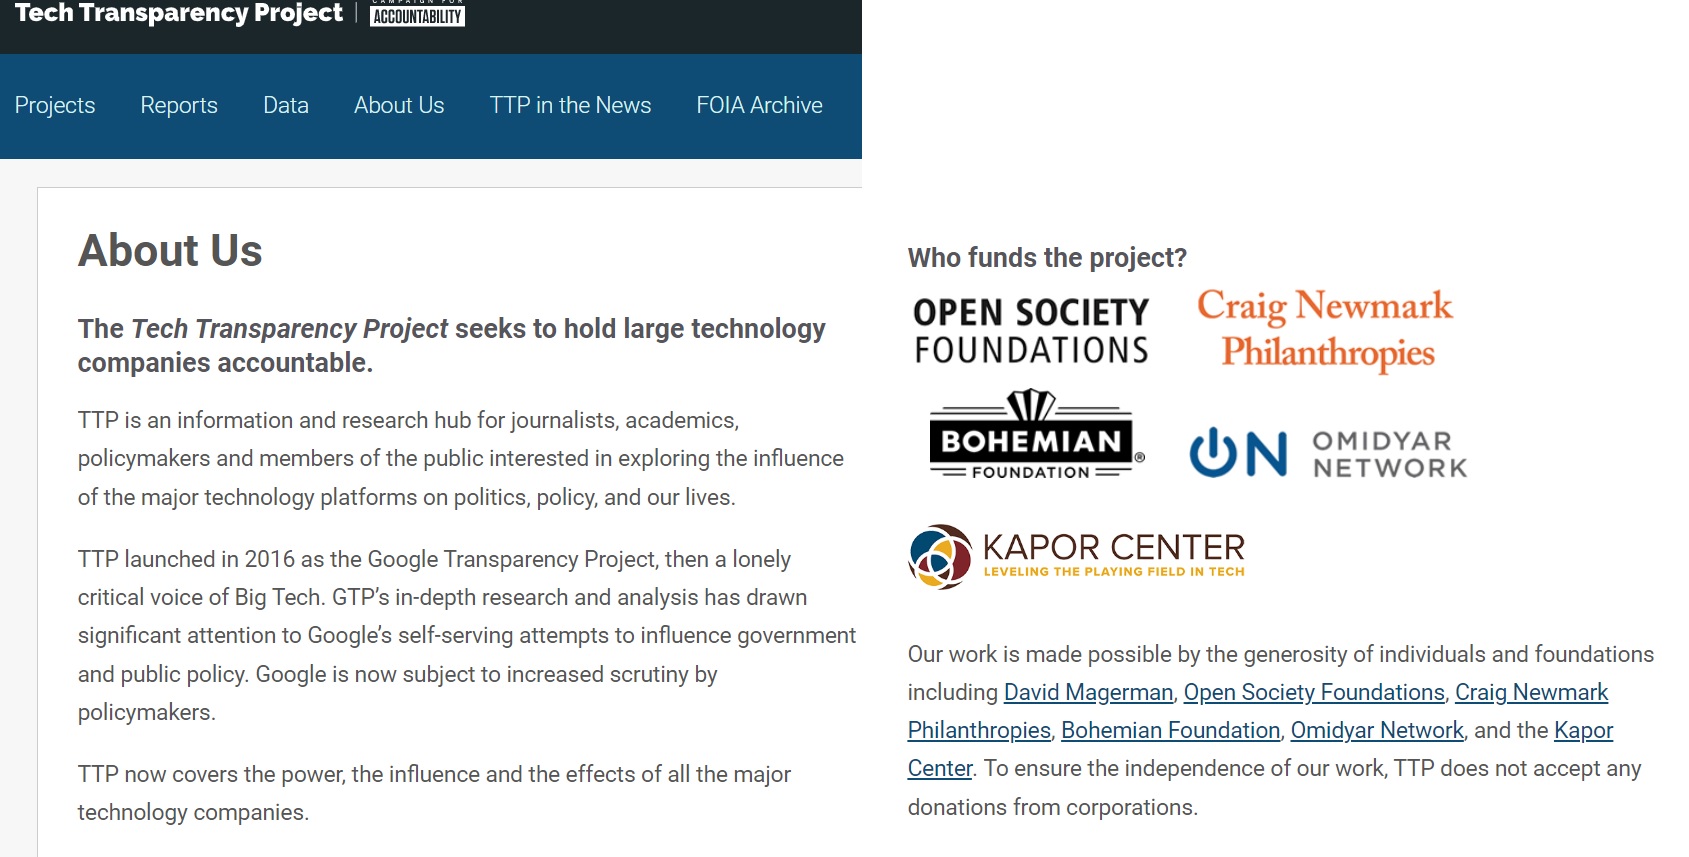 Image:Tech Transparency Project TTP funded by George Soros Open Society